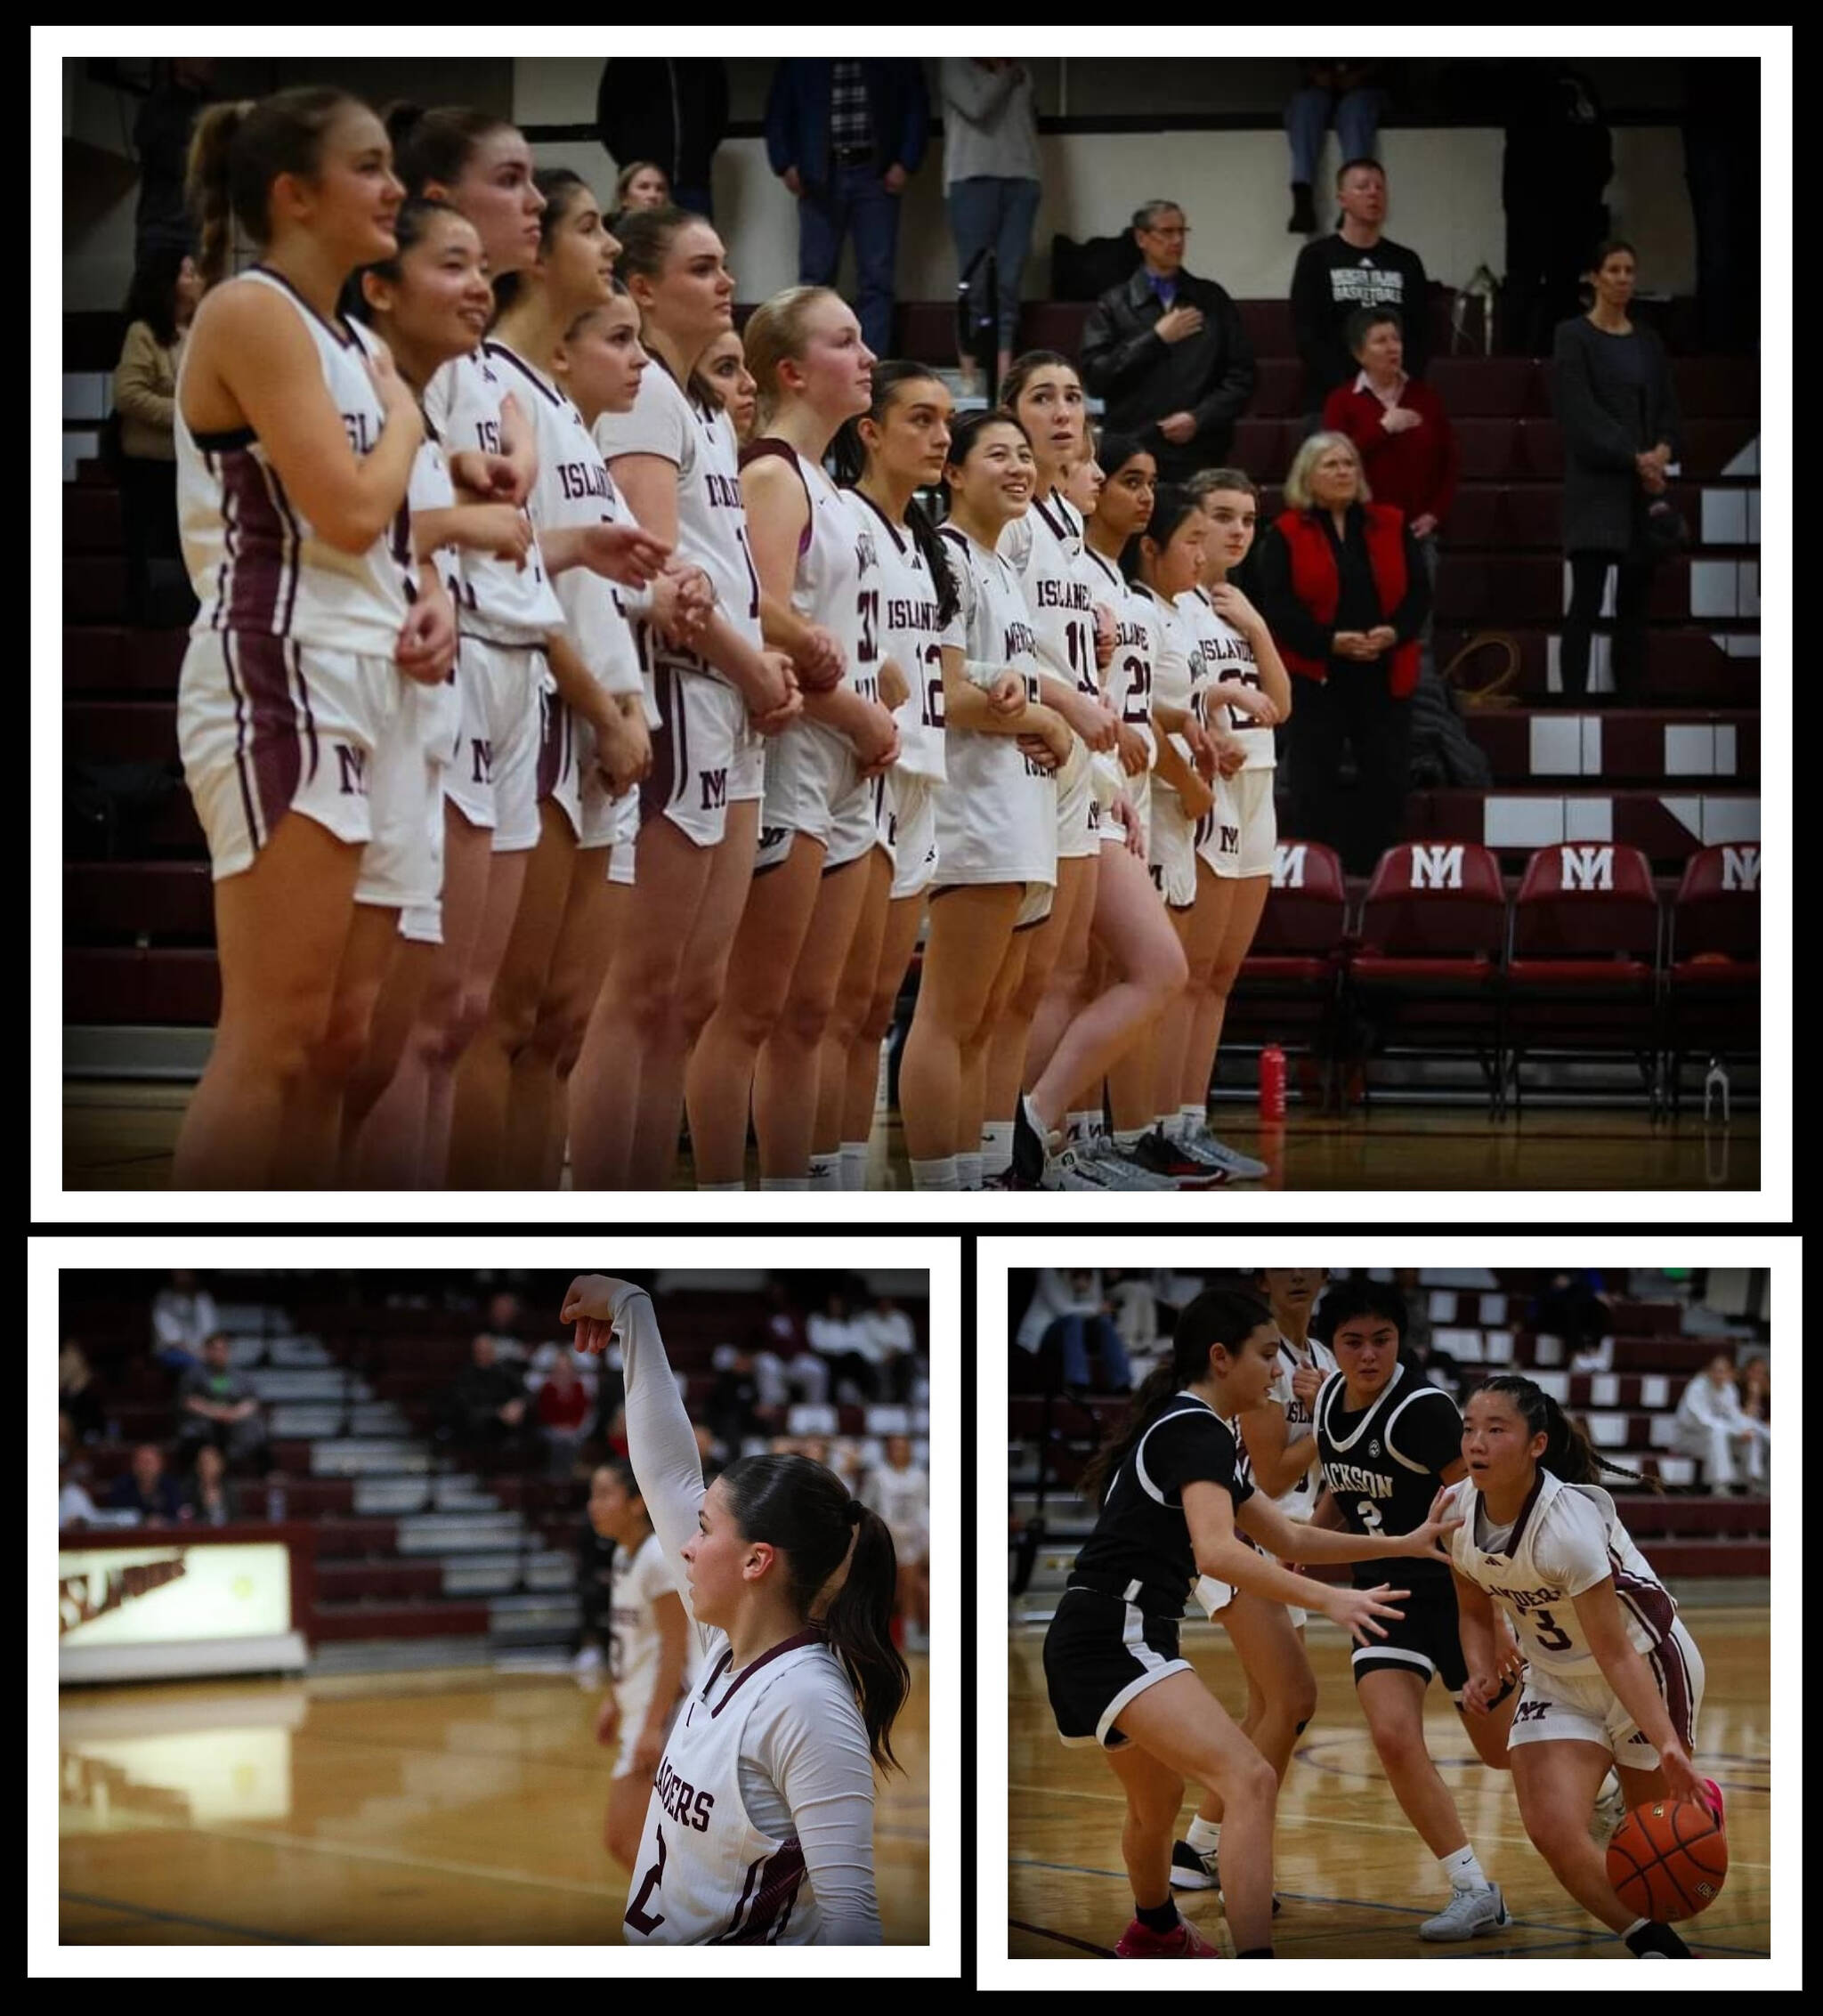 Mercer Island High School’s girls basketball team before the Jackson High School game on Dec. 11. Bottom, from left to right, Elianna Weiss and Anna Marsh. Photos courtesy of Shot by Stout @shot.by.stout